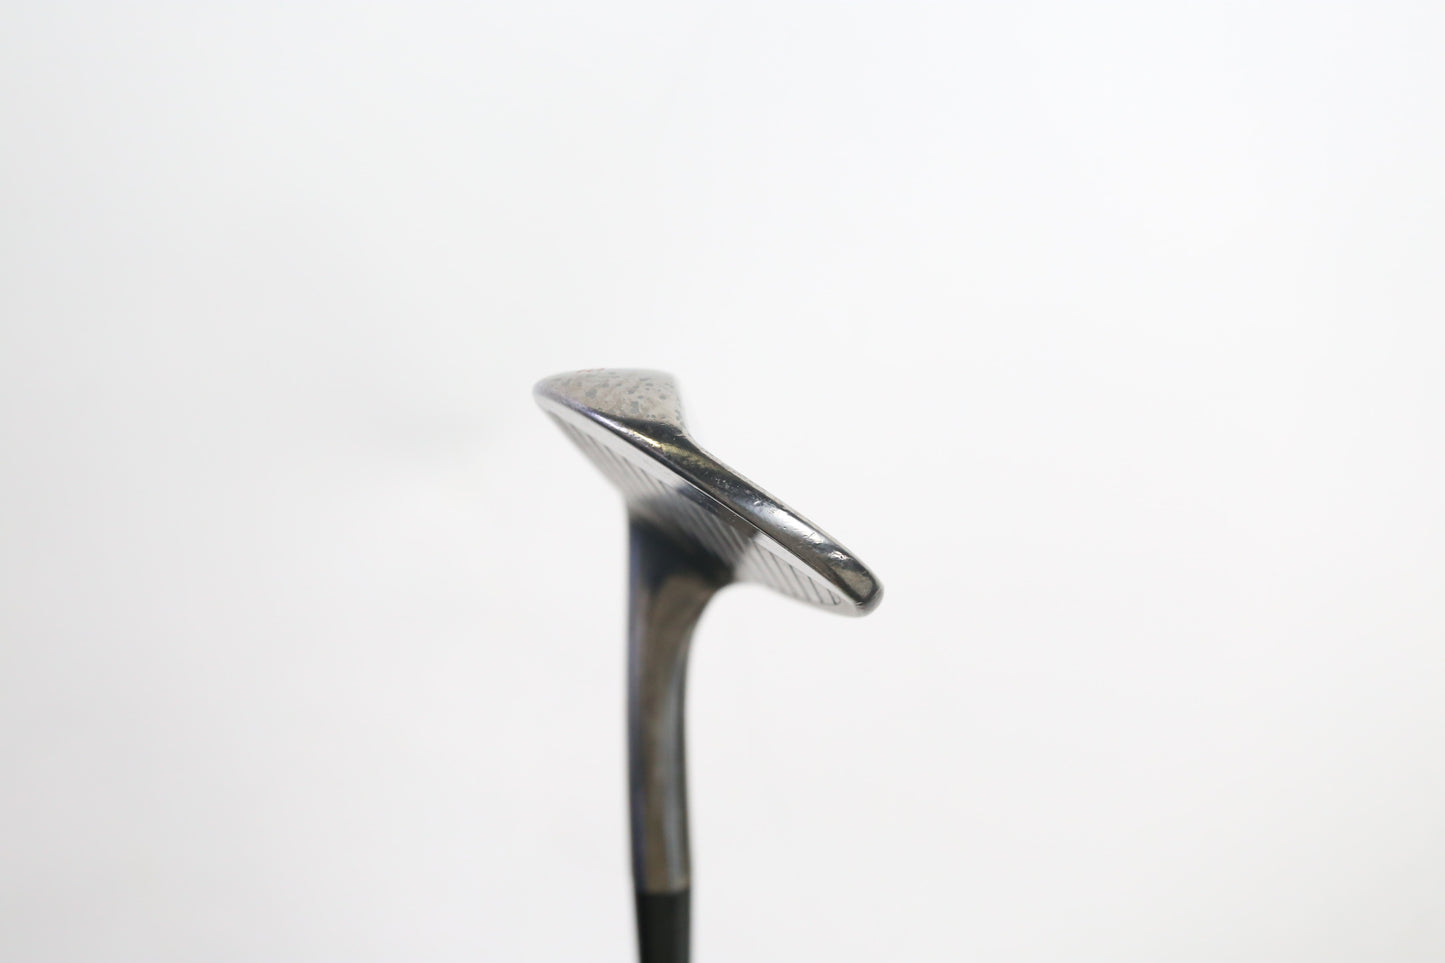 Used TaylorMade Tour Preferred EF Lob Wedge - Right-Handed - 58 Degrees - Stiff Flex